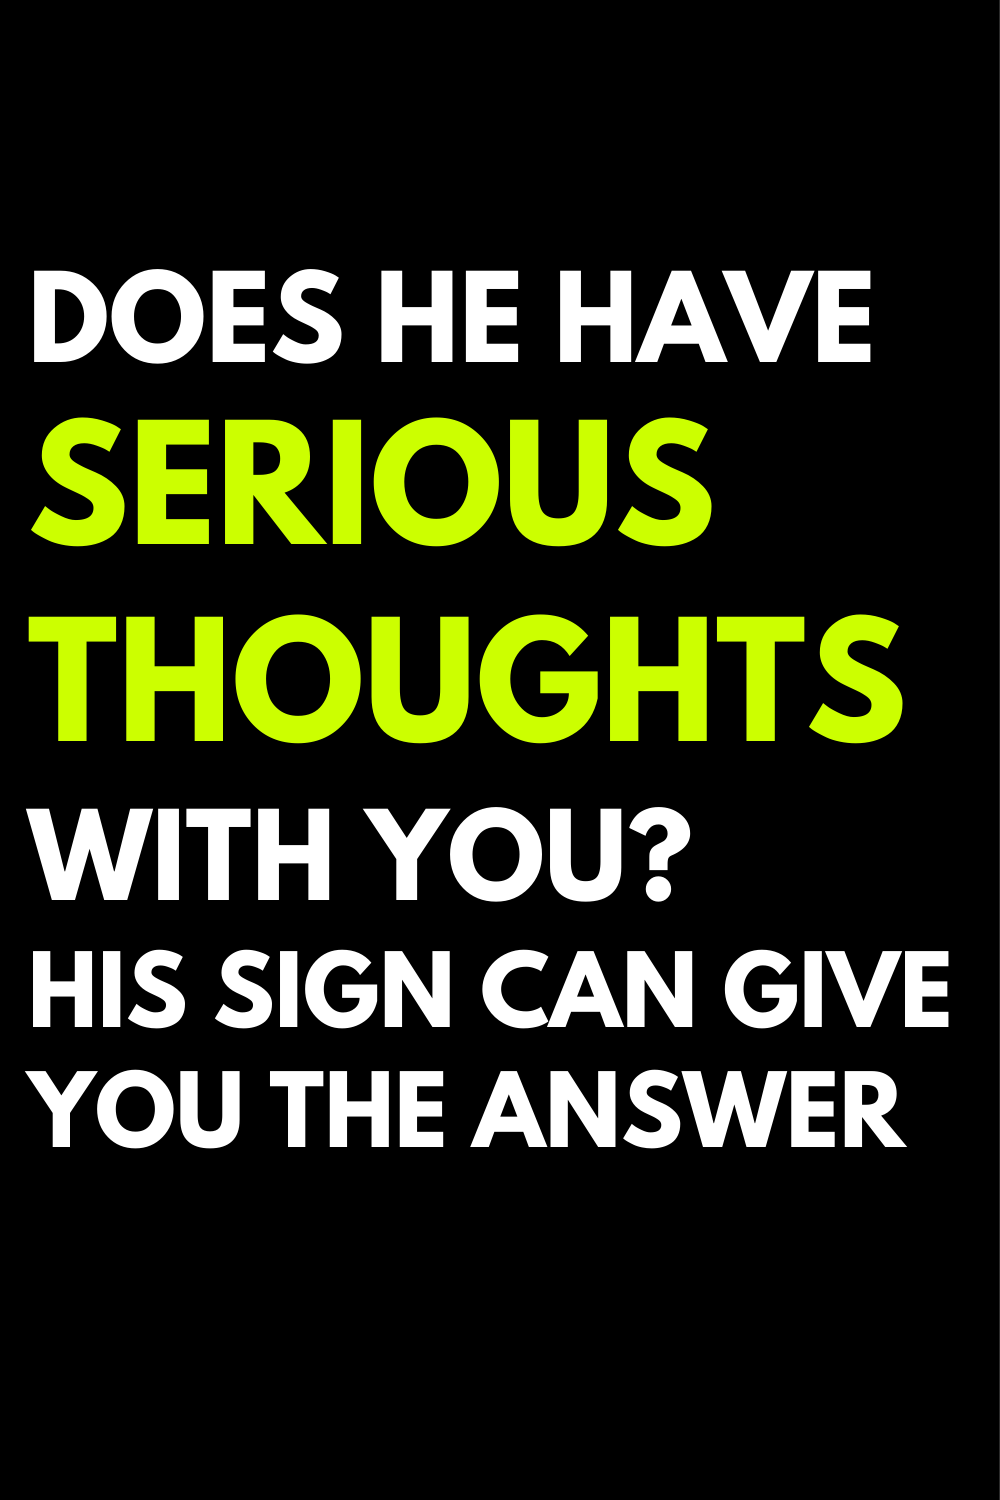 Does he have serious thoughts with you? His sign can give you the answer